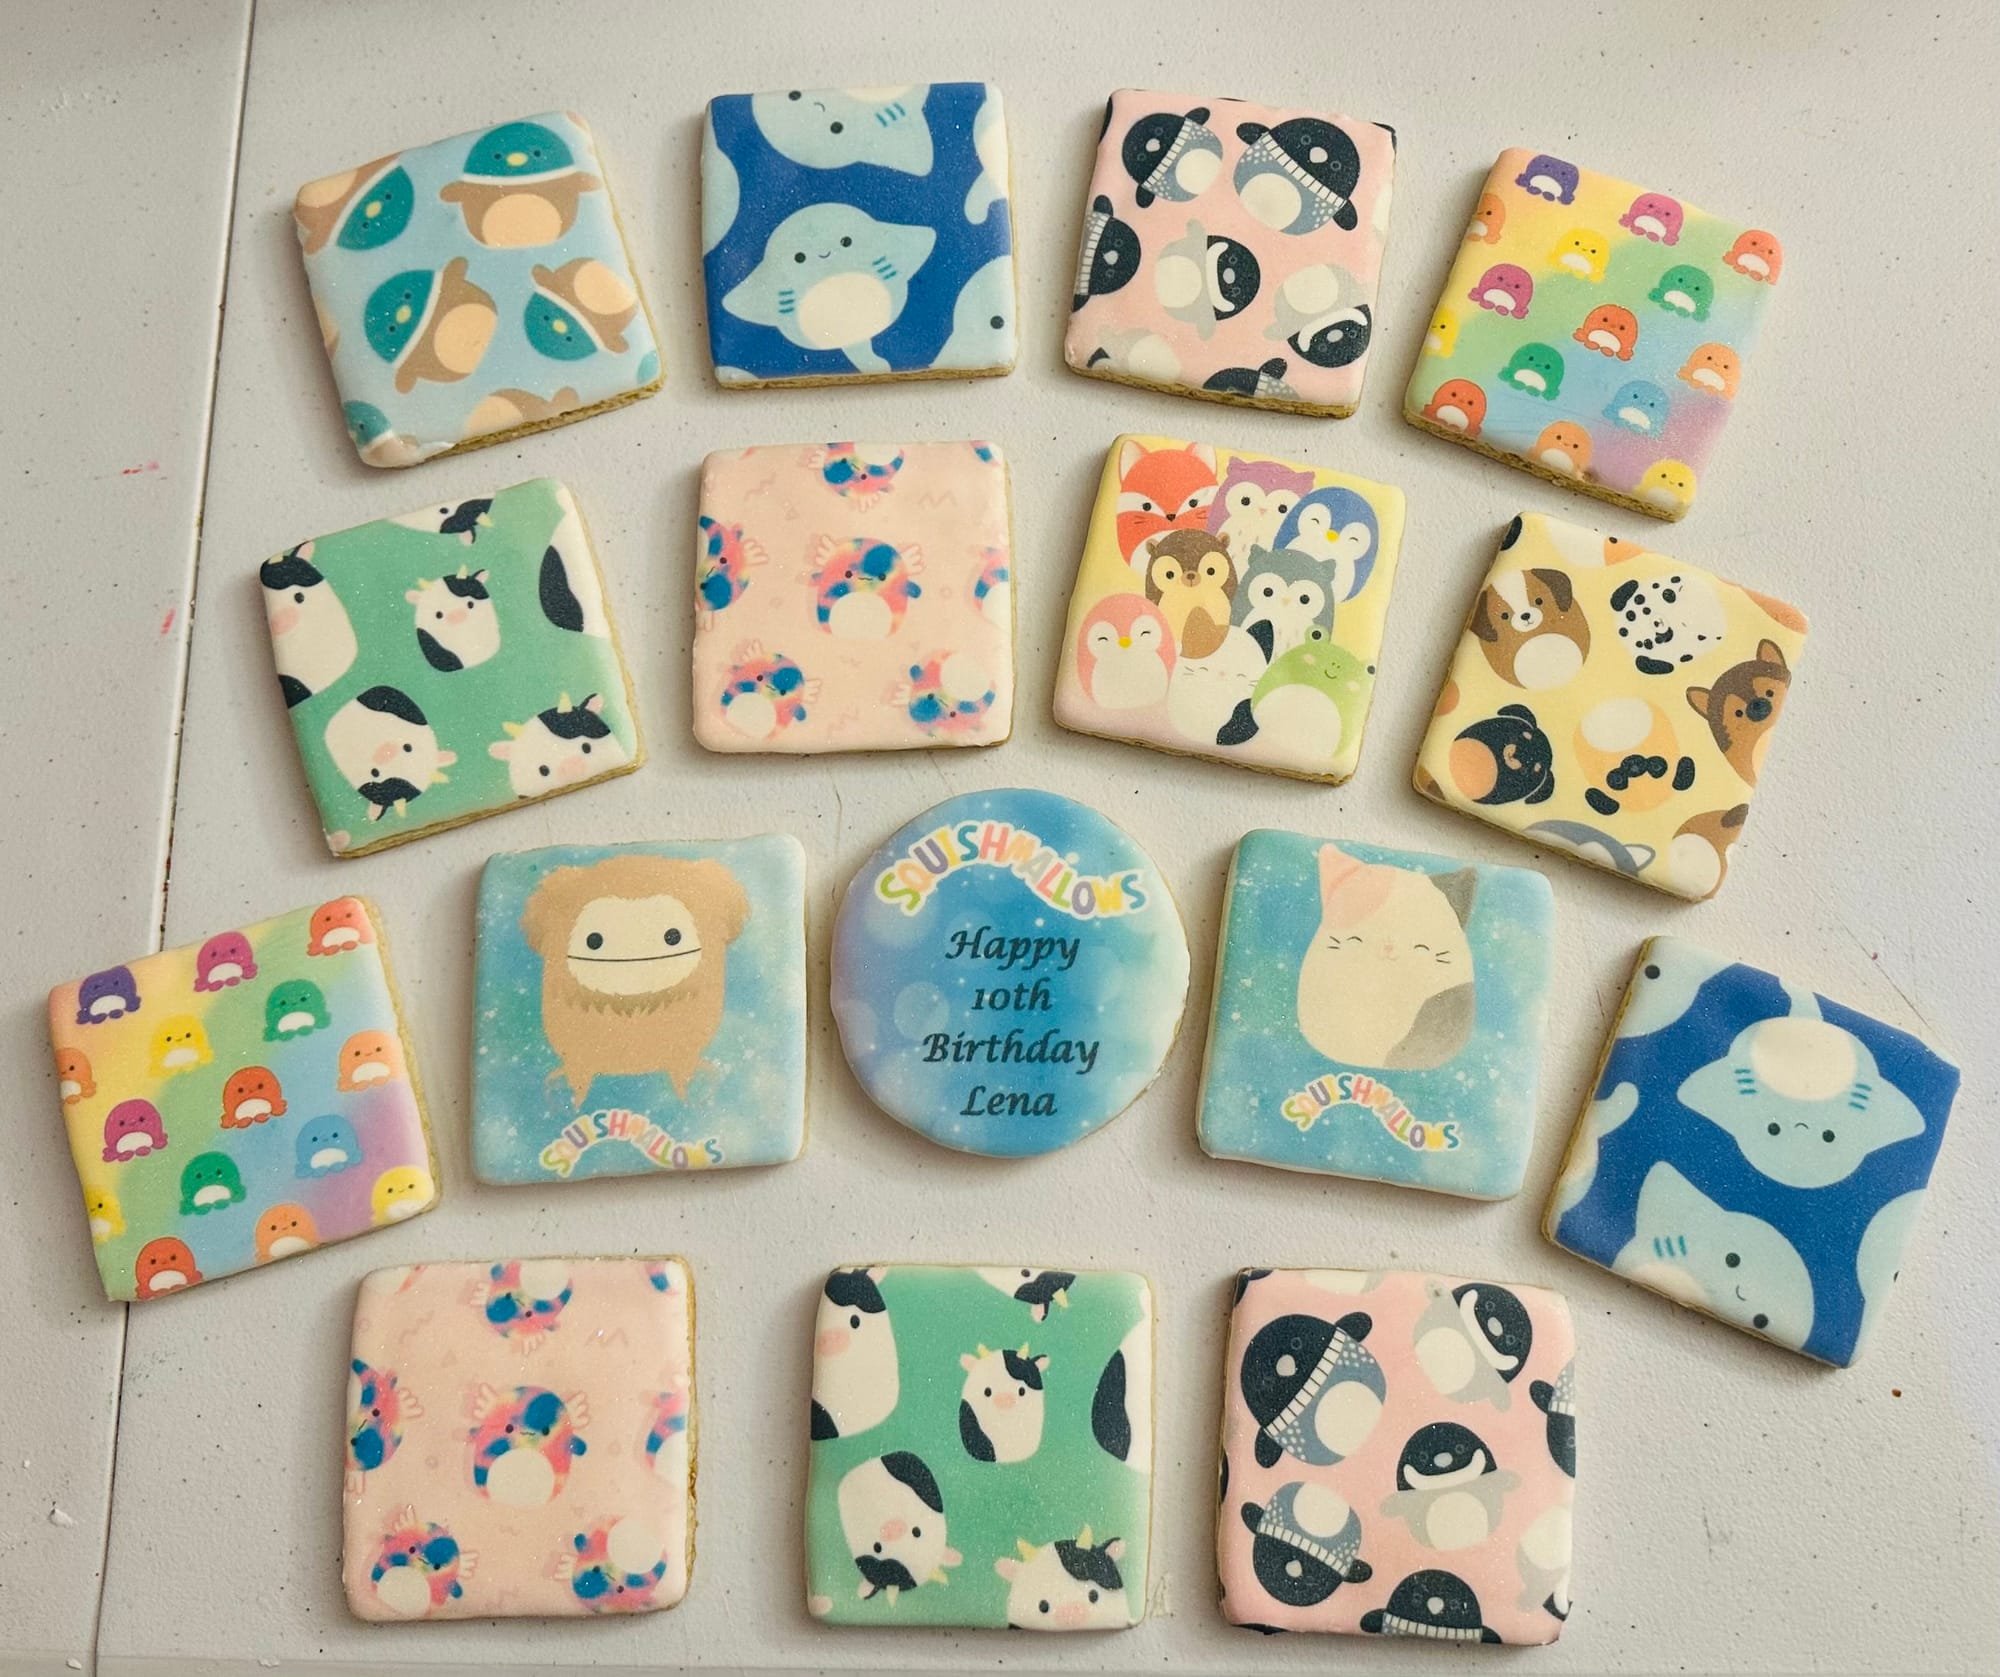 Squishmallow Royal Icing Sugar Cookies with Image